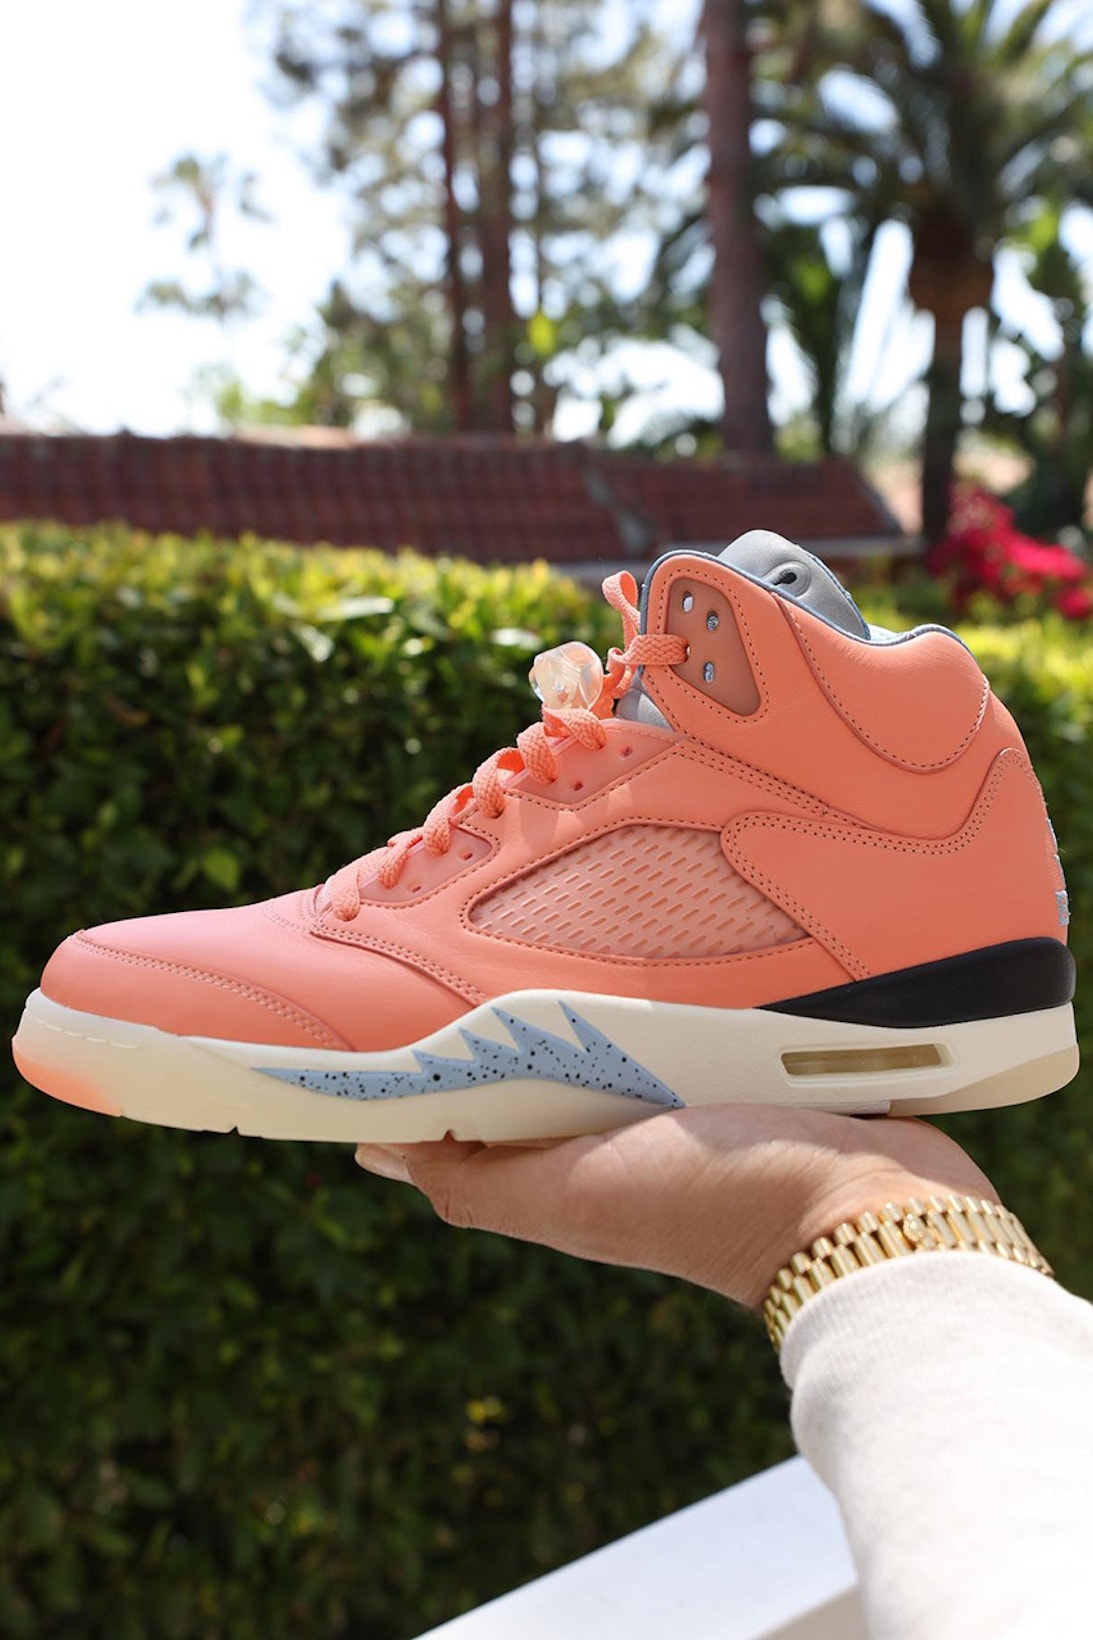 DJ Khaled Equips Air Jordan 5 We the Best Collab With Spring